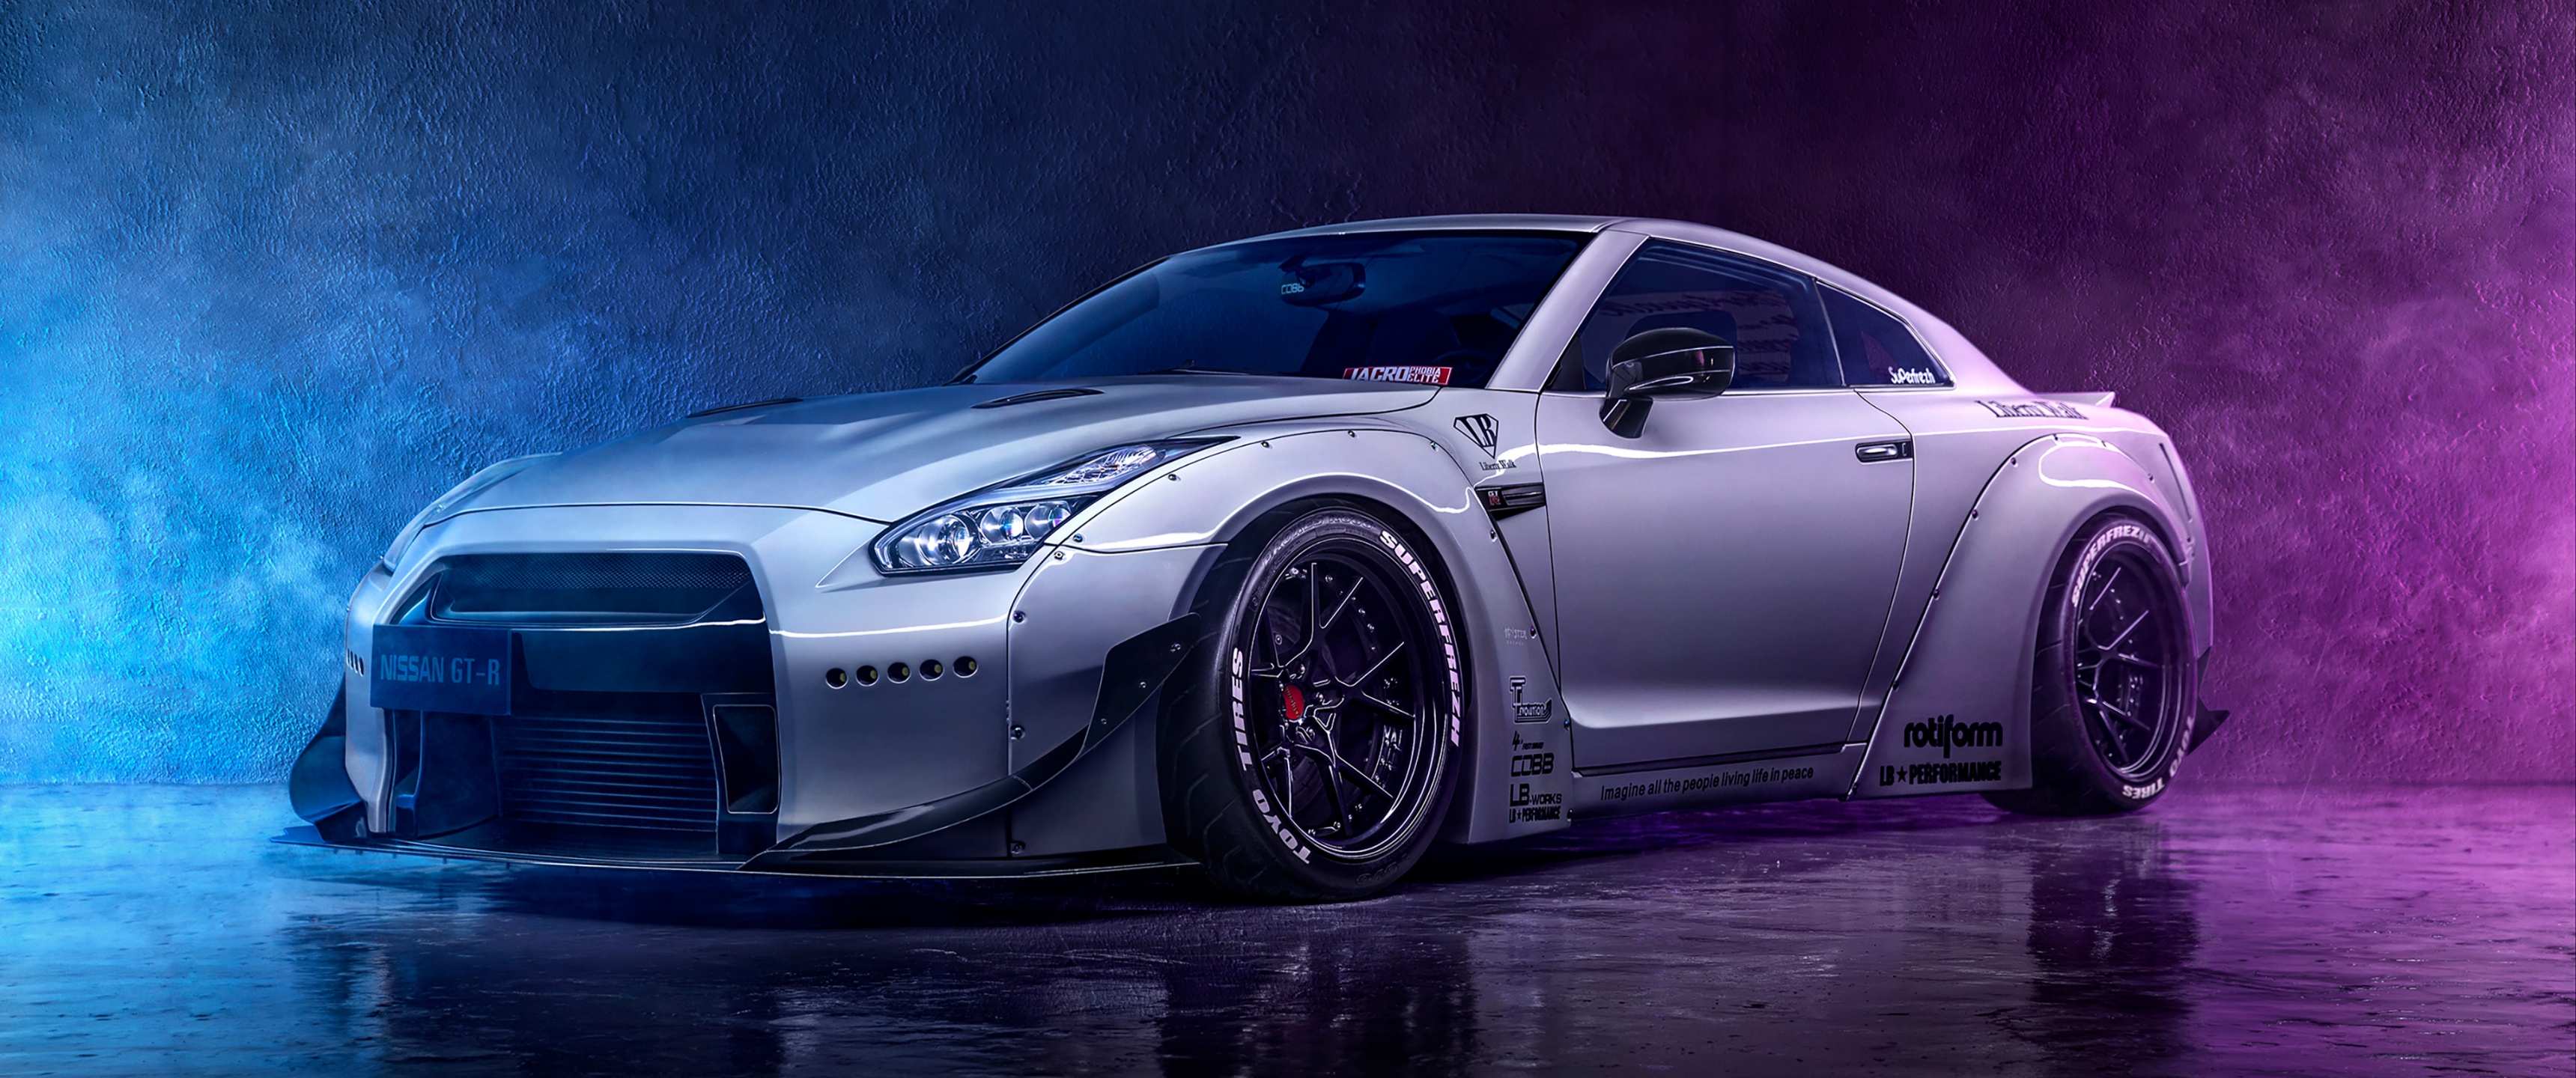 Wallpaper ID 521901  Nissan motor vehicle 1080P Anime Colors sports  Car speed motion Energy sports wheel motorsport supercar  Aerography Violet gray blue electricity free download